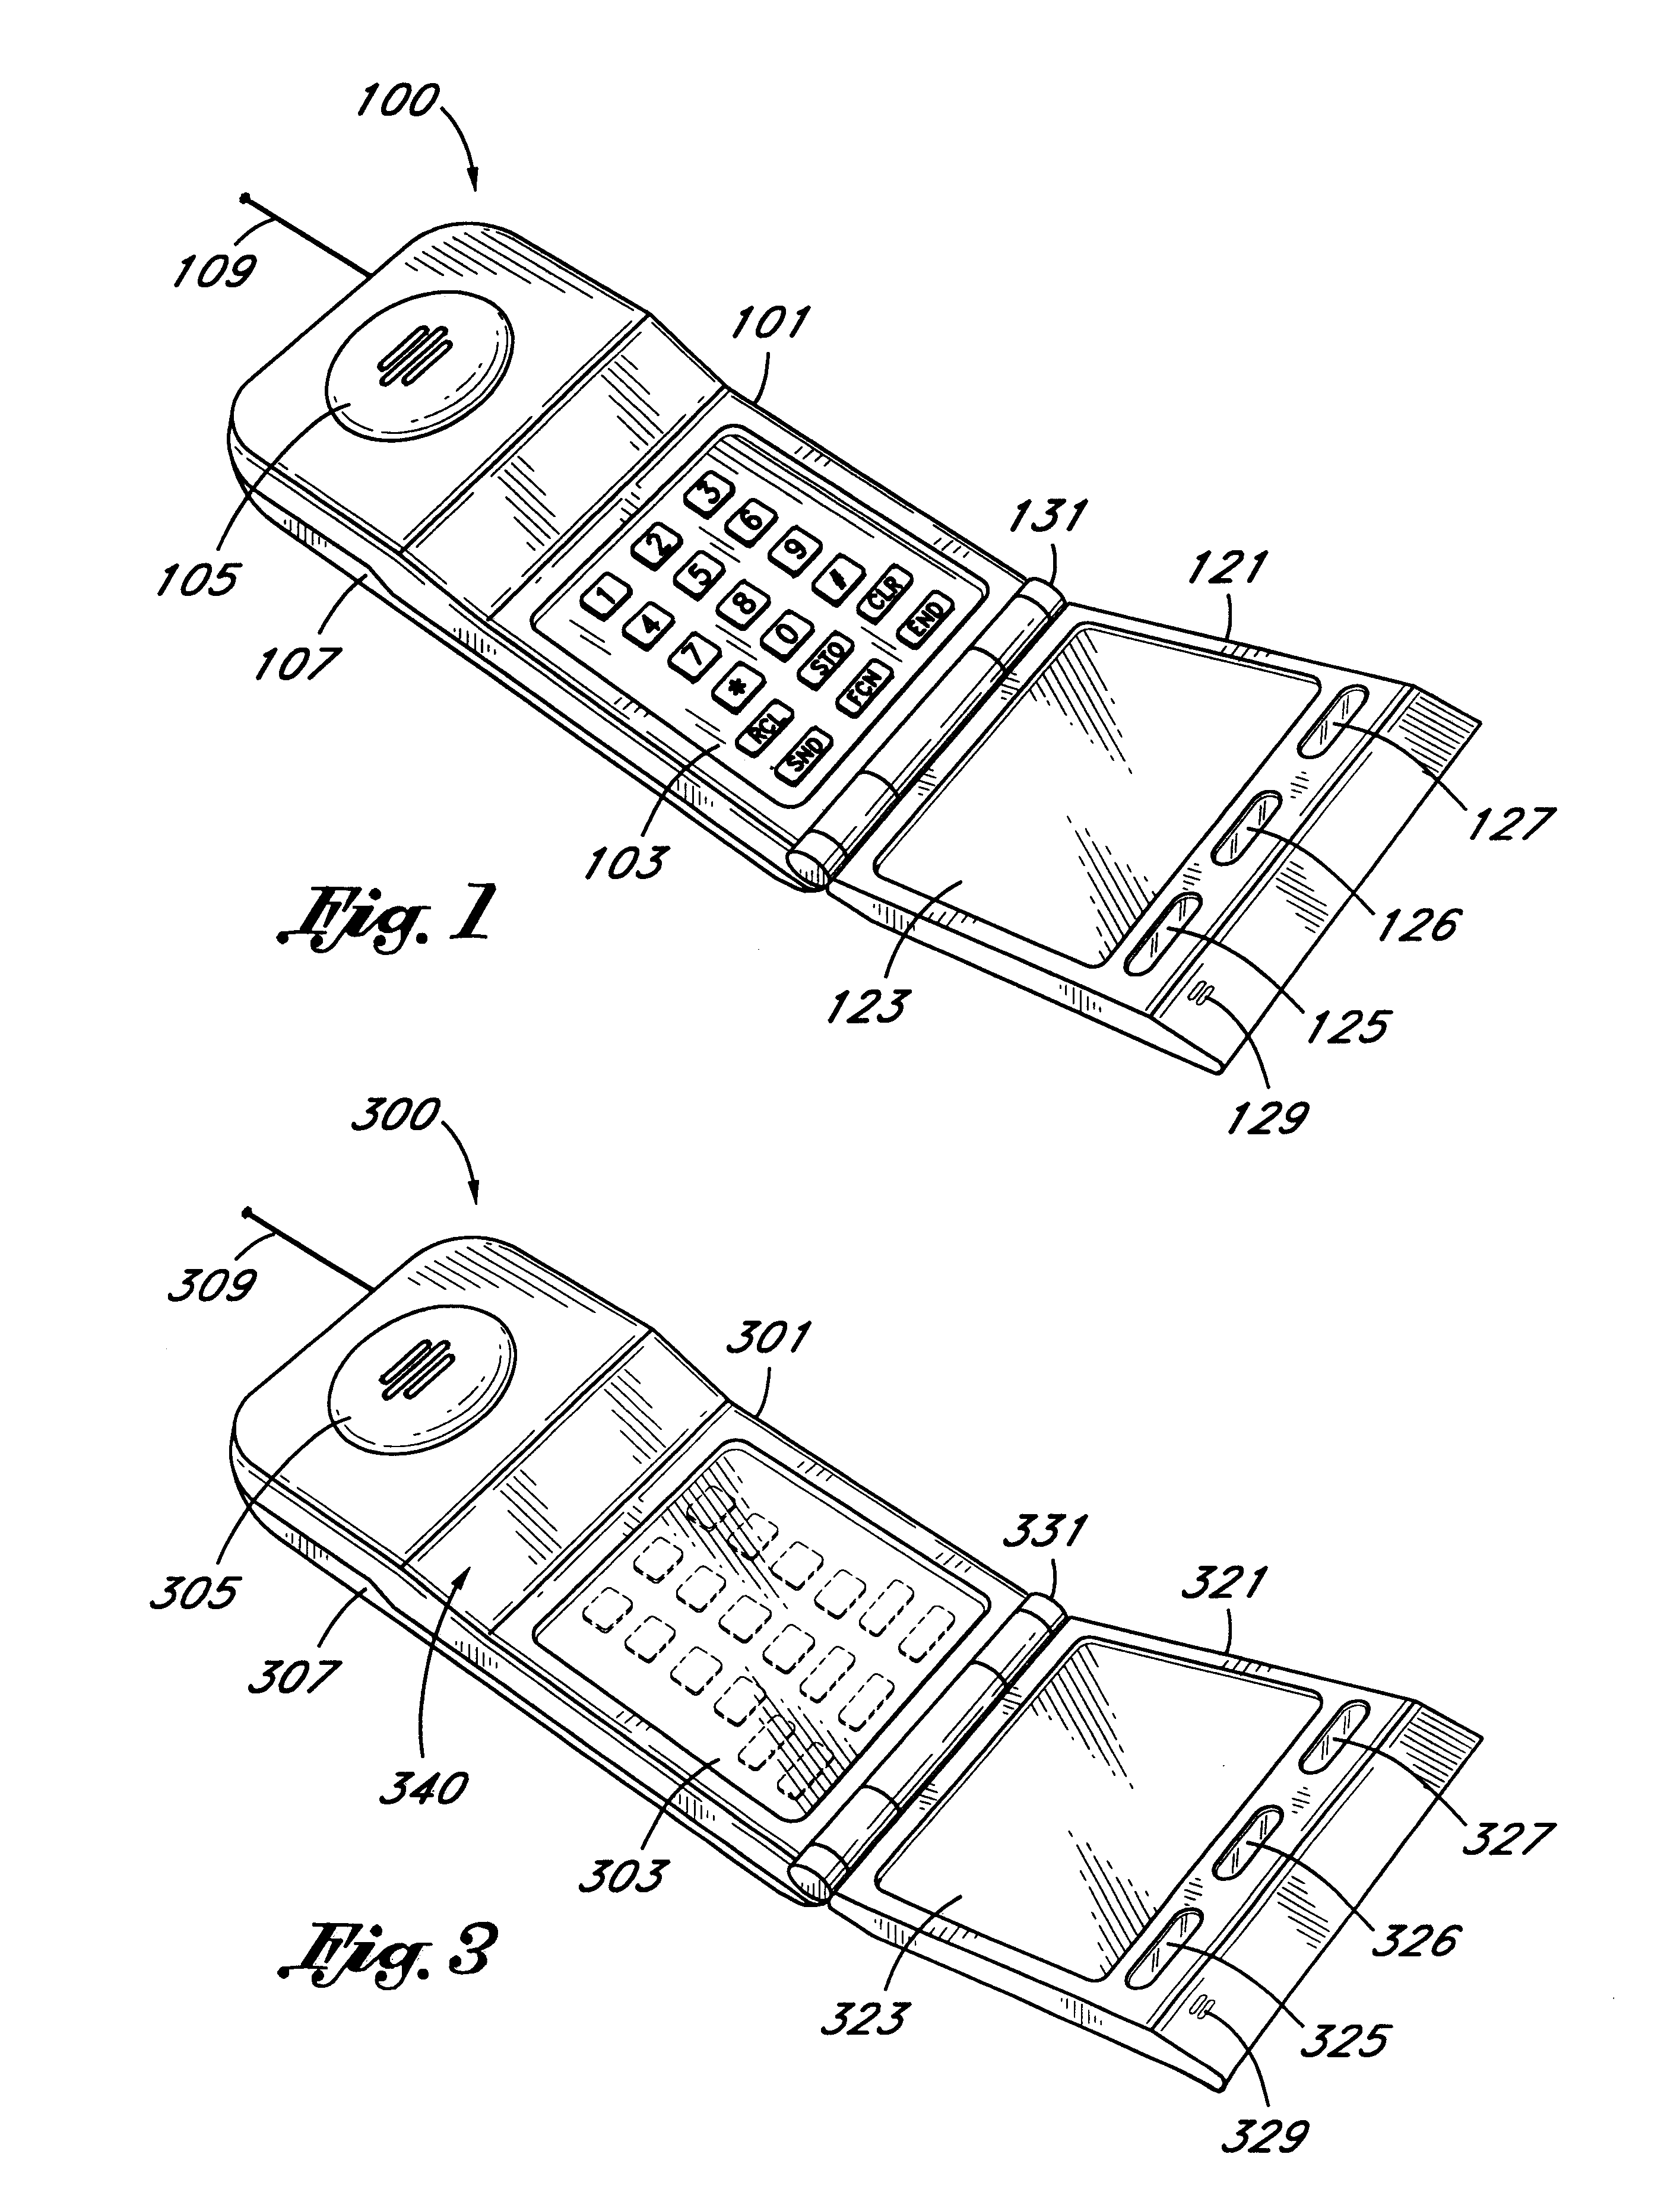 Personal communicator with flip element display